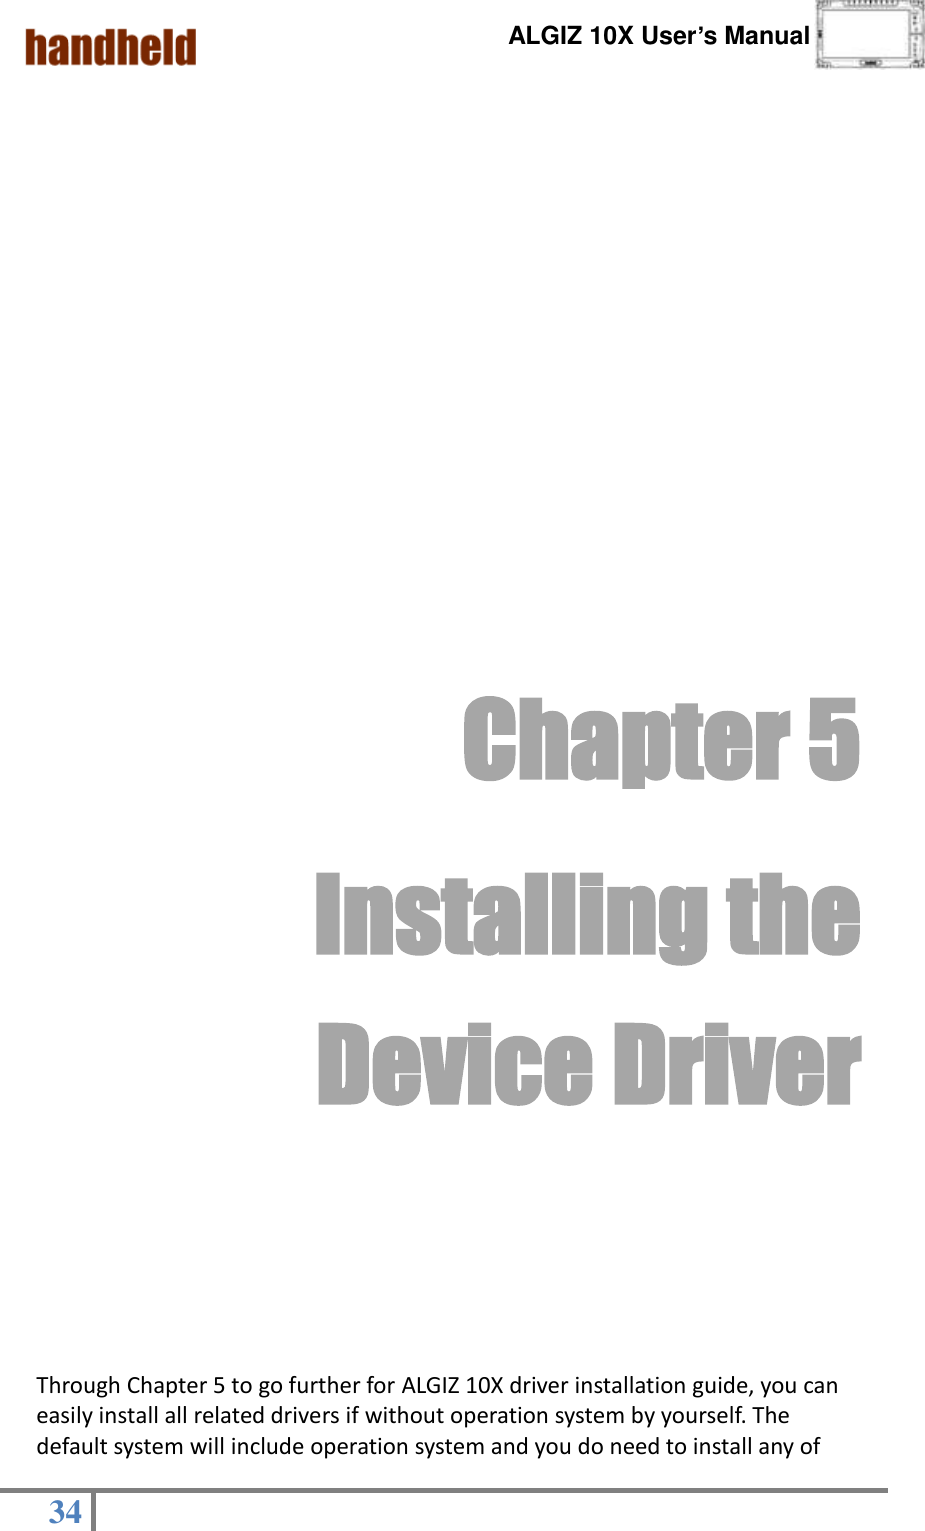      ALGIZ 10X User’s Manual  34            Chapter 5   Installing the Device Driver        Through Chapter 5 to go further for ALGIZ 10X driver installation guide, you can easily install all related drivers if without operation system by yourself. The default system will include operation system and you do need to install any of 